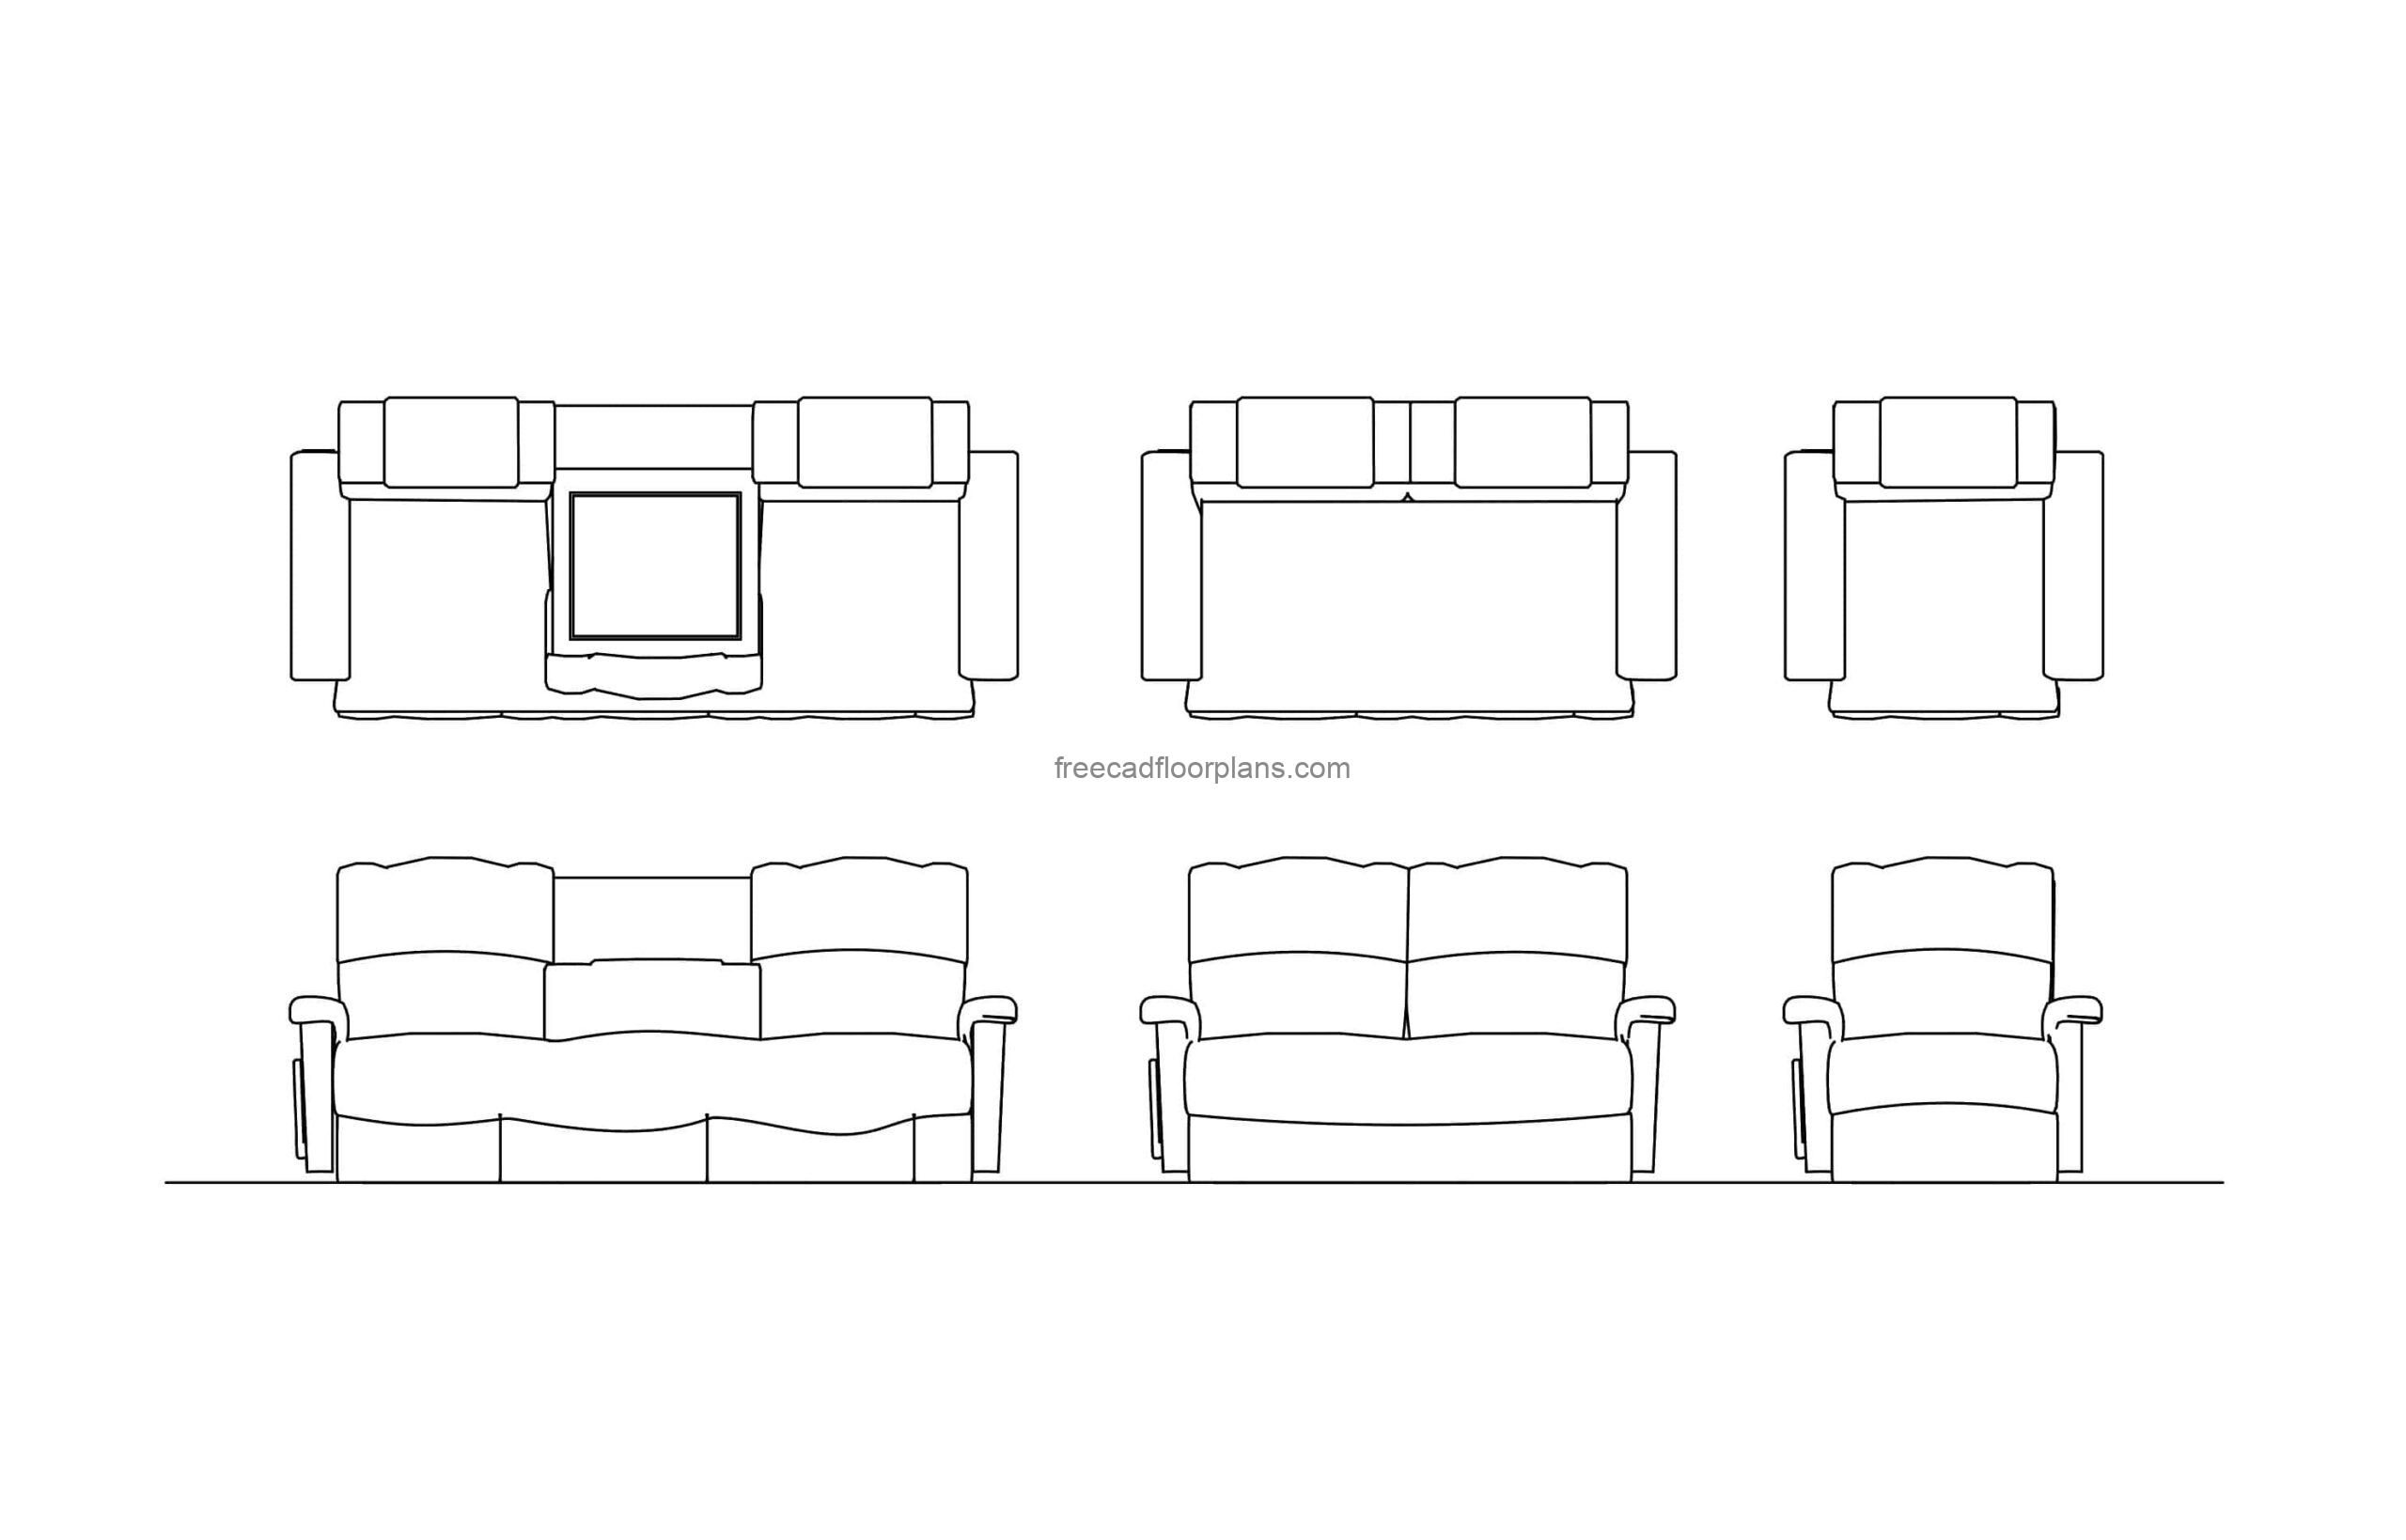 dwg autocad drawing of classic recliners sofas, plan and elevations 2d views file for free download